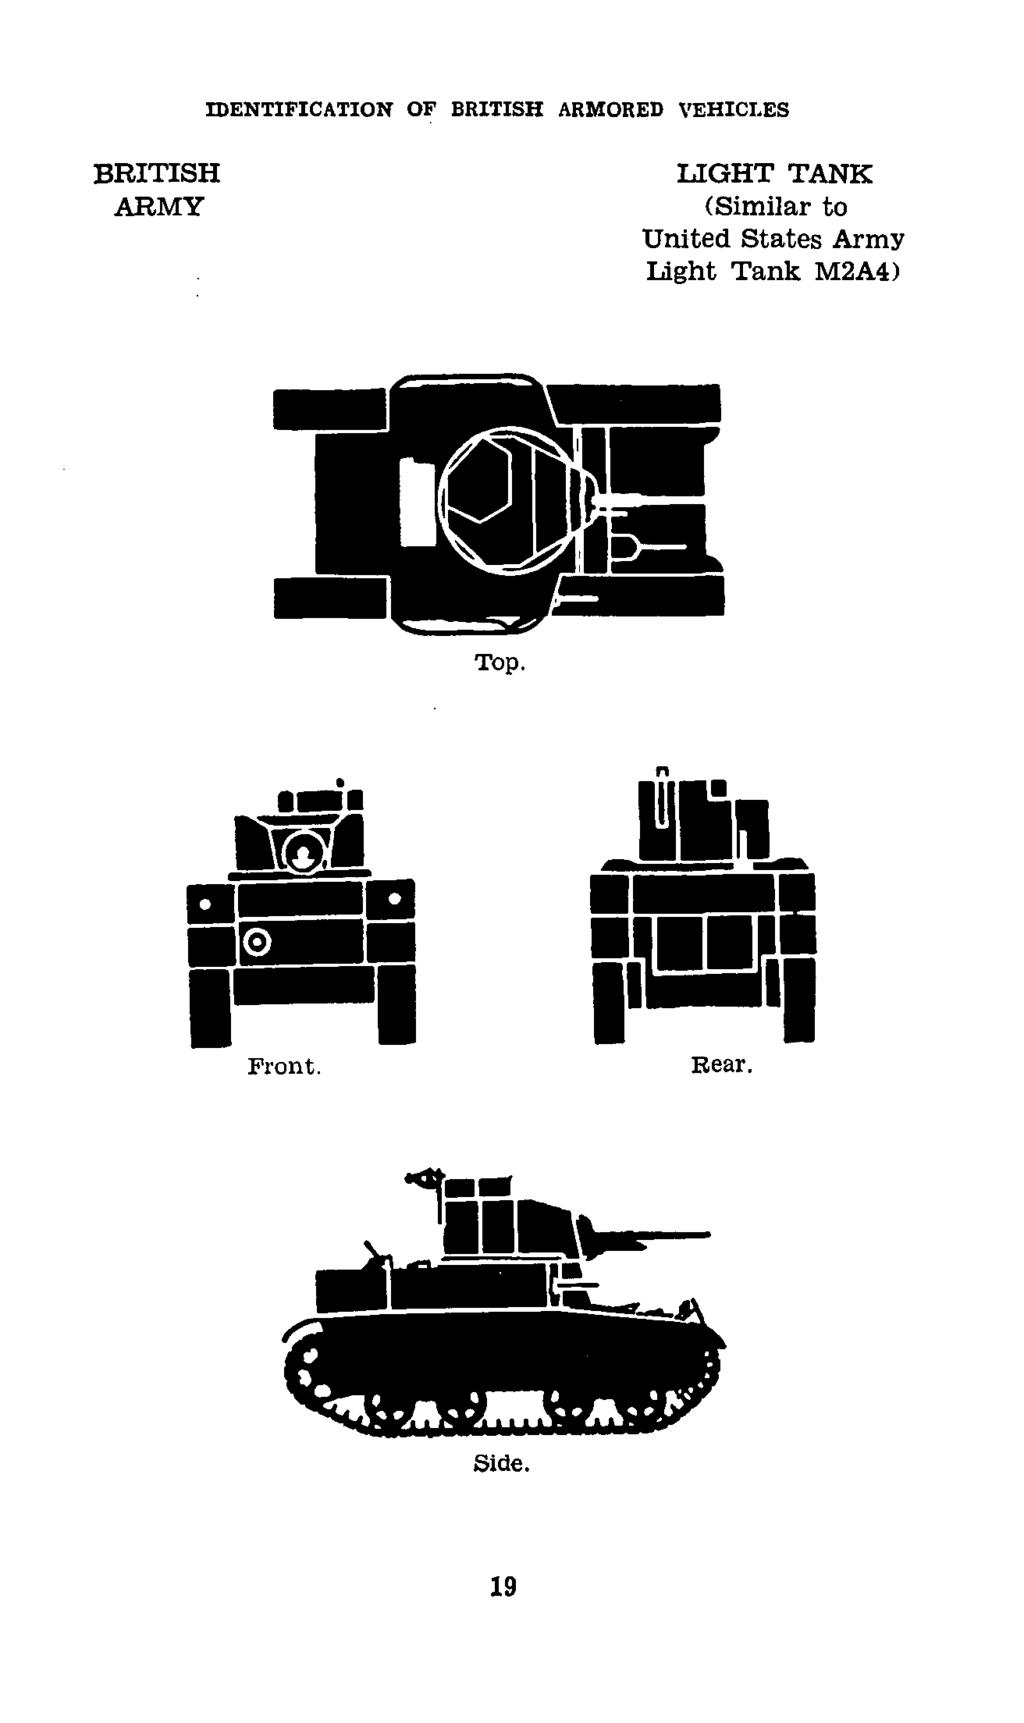 IDENTIFICATION OF ARMORED VEHICLES LIGHT TANK (Similar to United